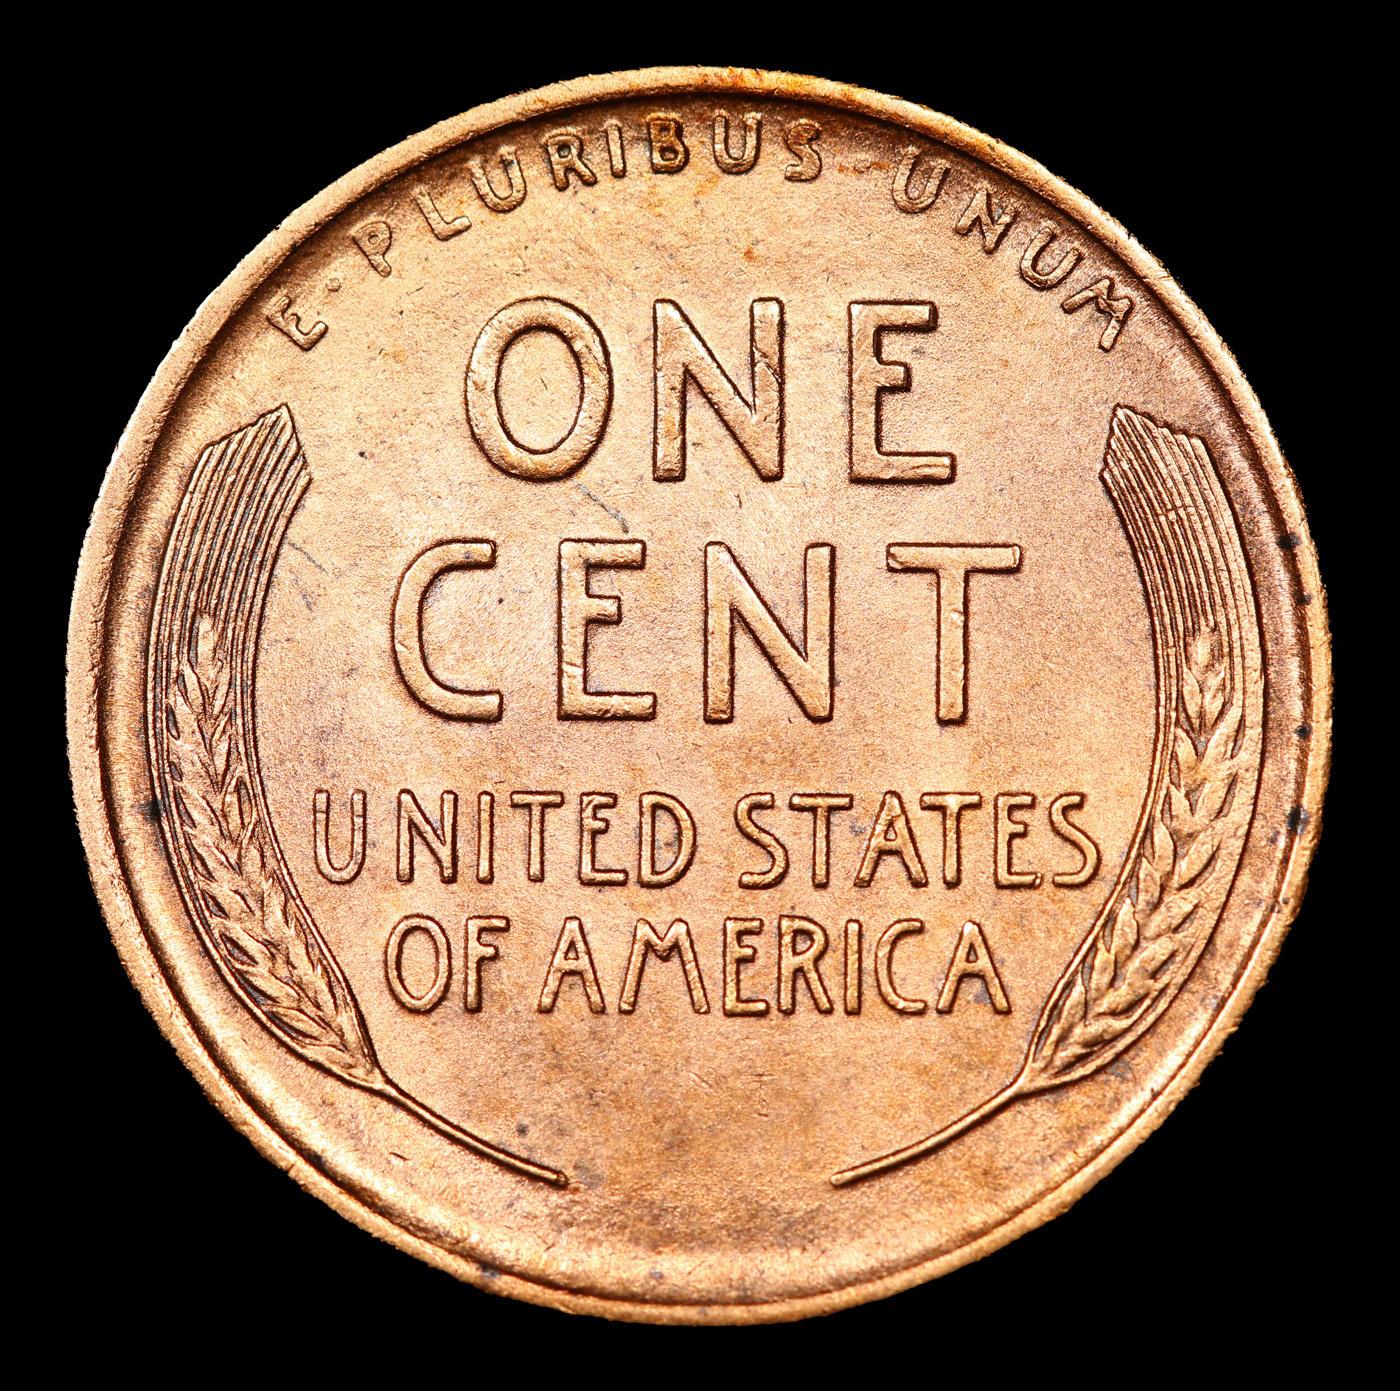 ***Auction Highlight*** 1920-s Lincoln Cent 1c Graded Select Unc RD BY USCG (fc)